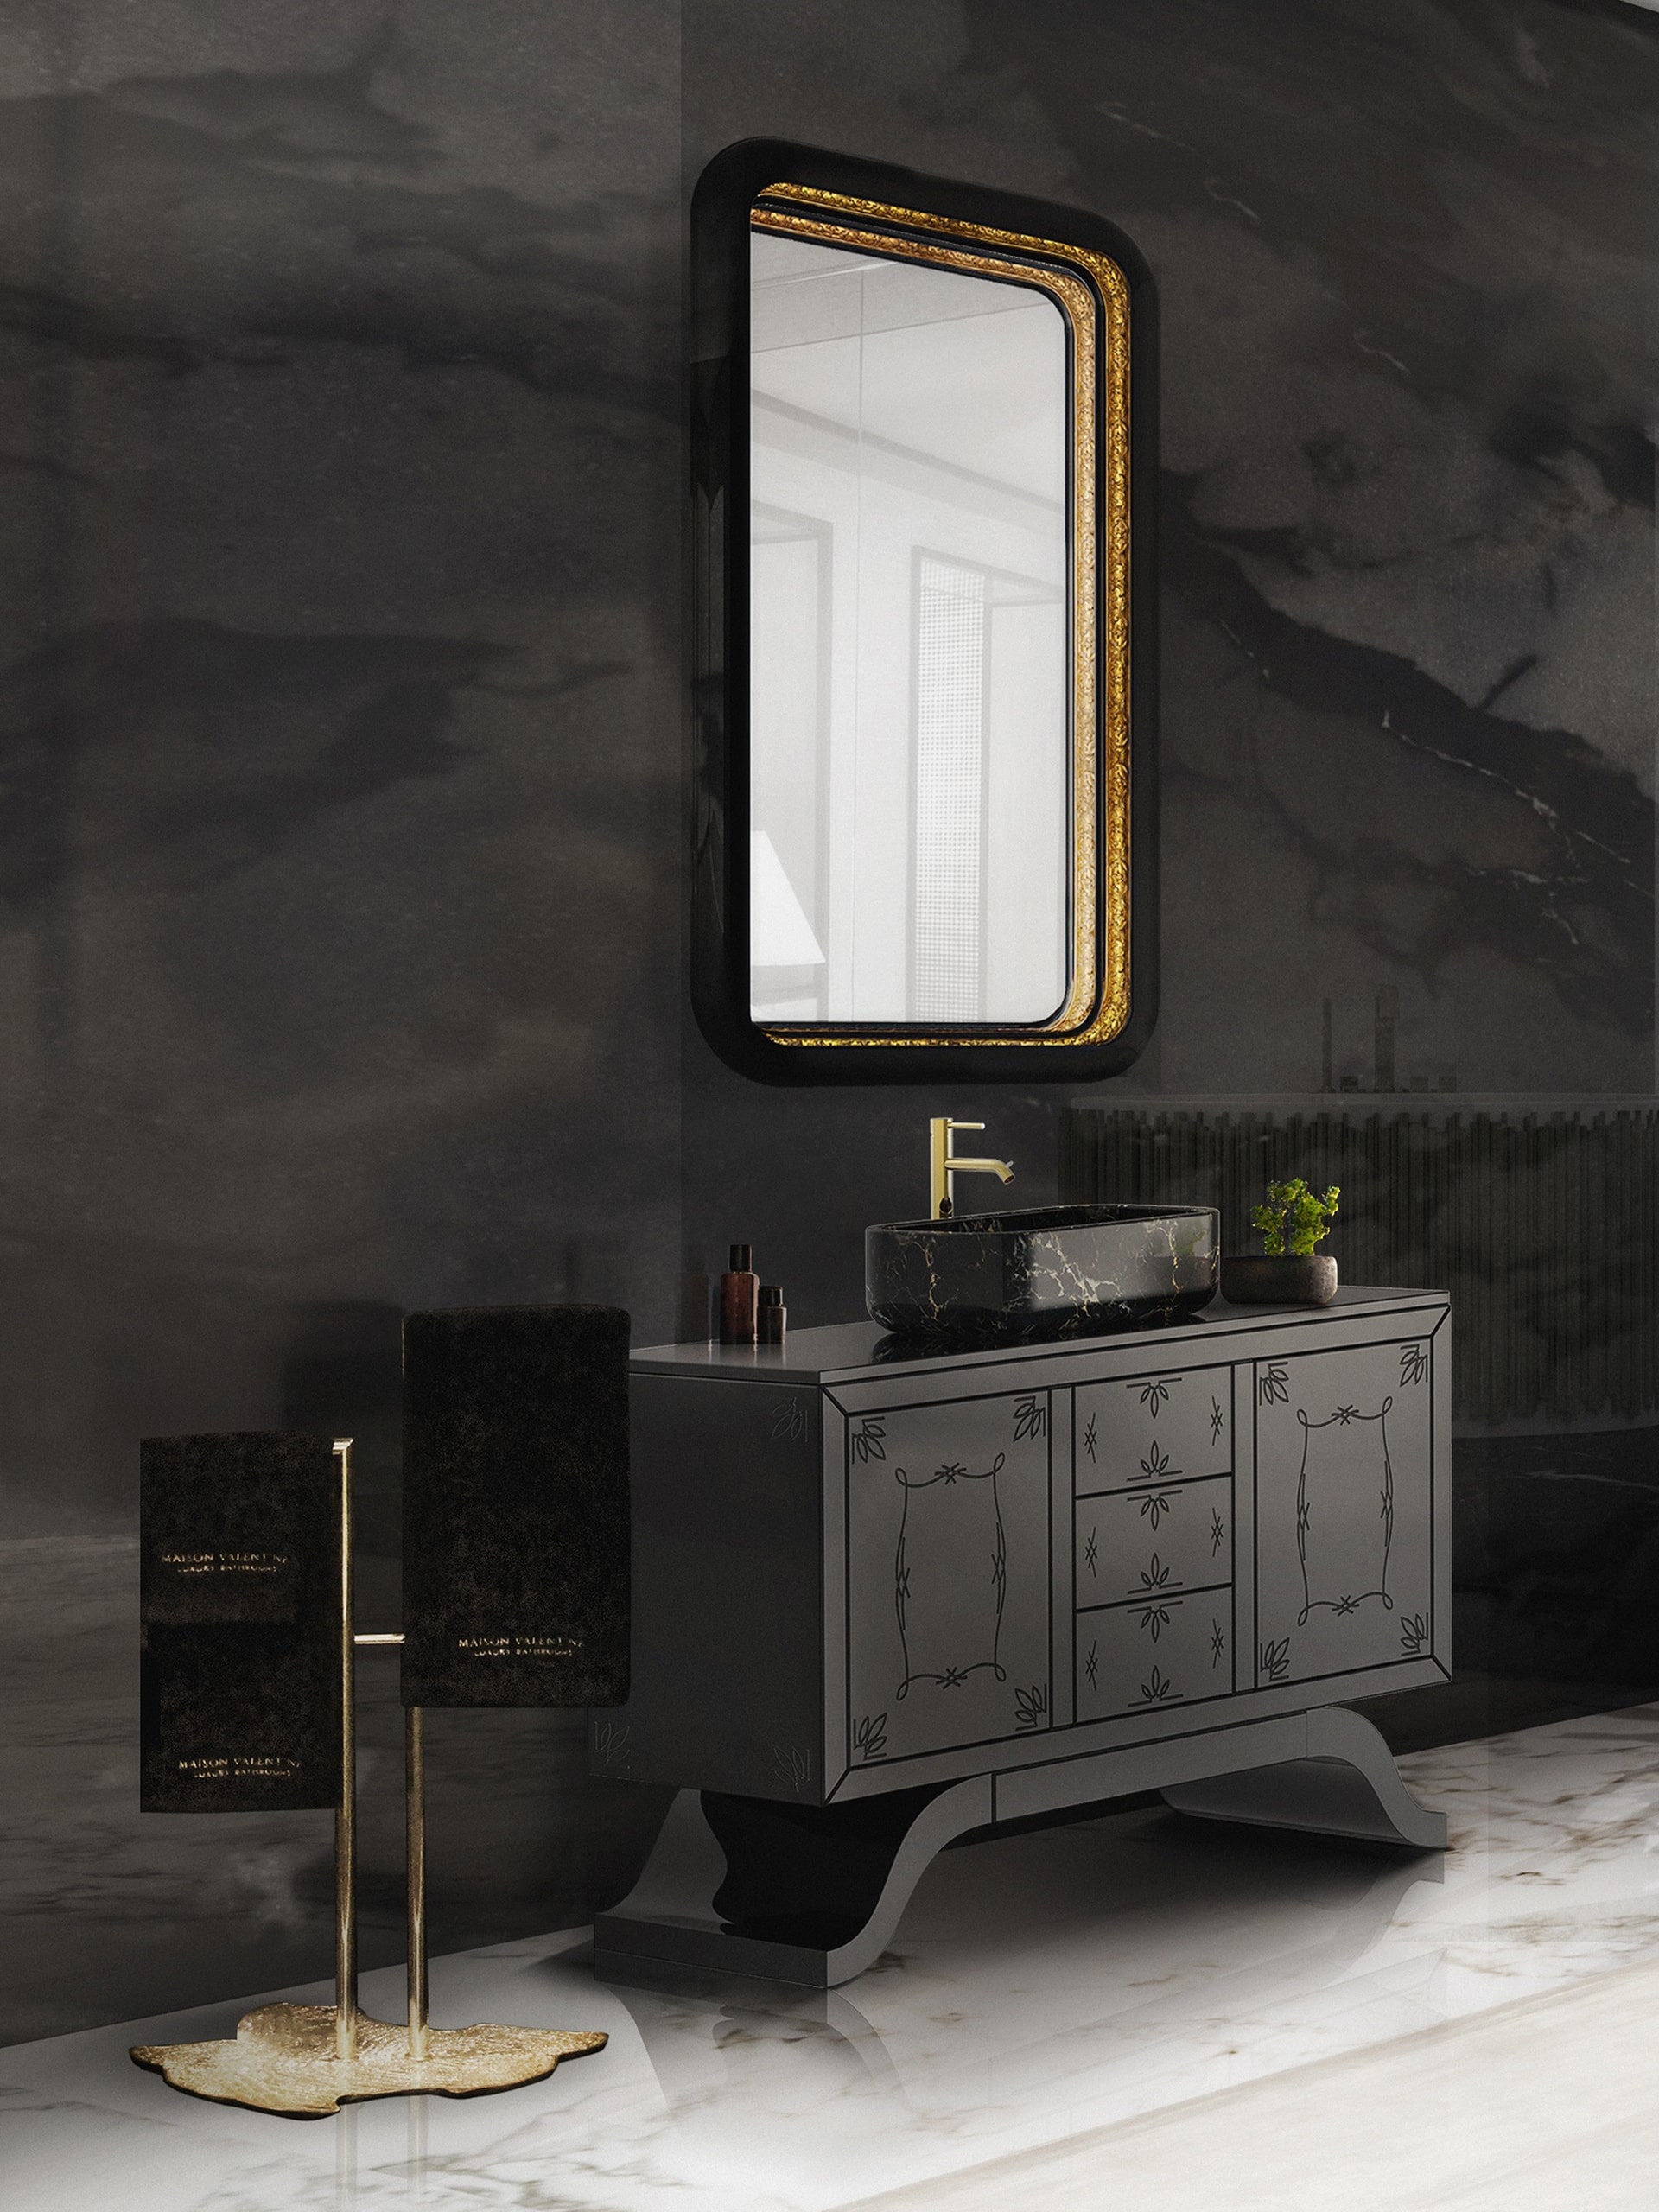 Black Luxury Bathroom With Square Mirror With A Golden Frame - Home'Society